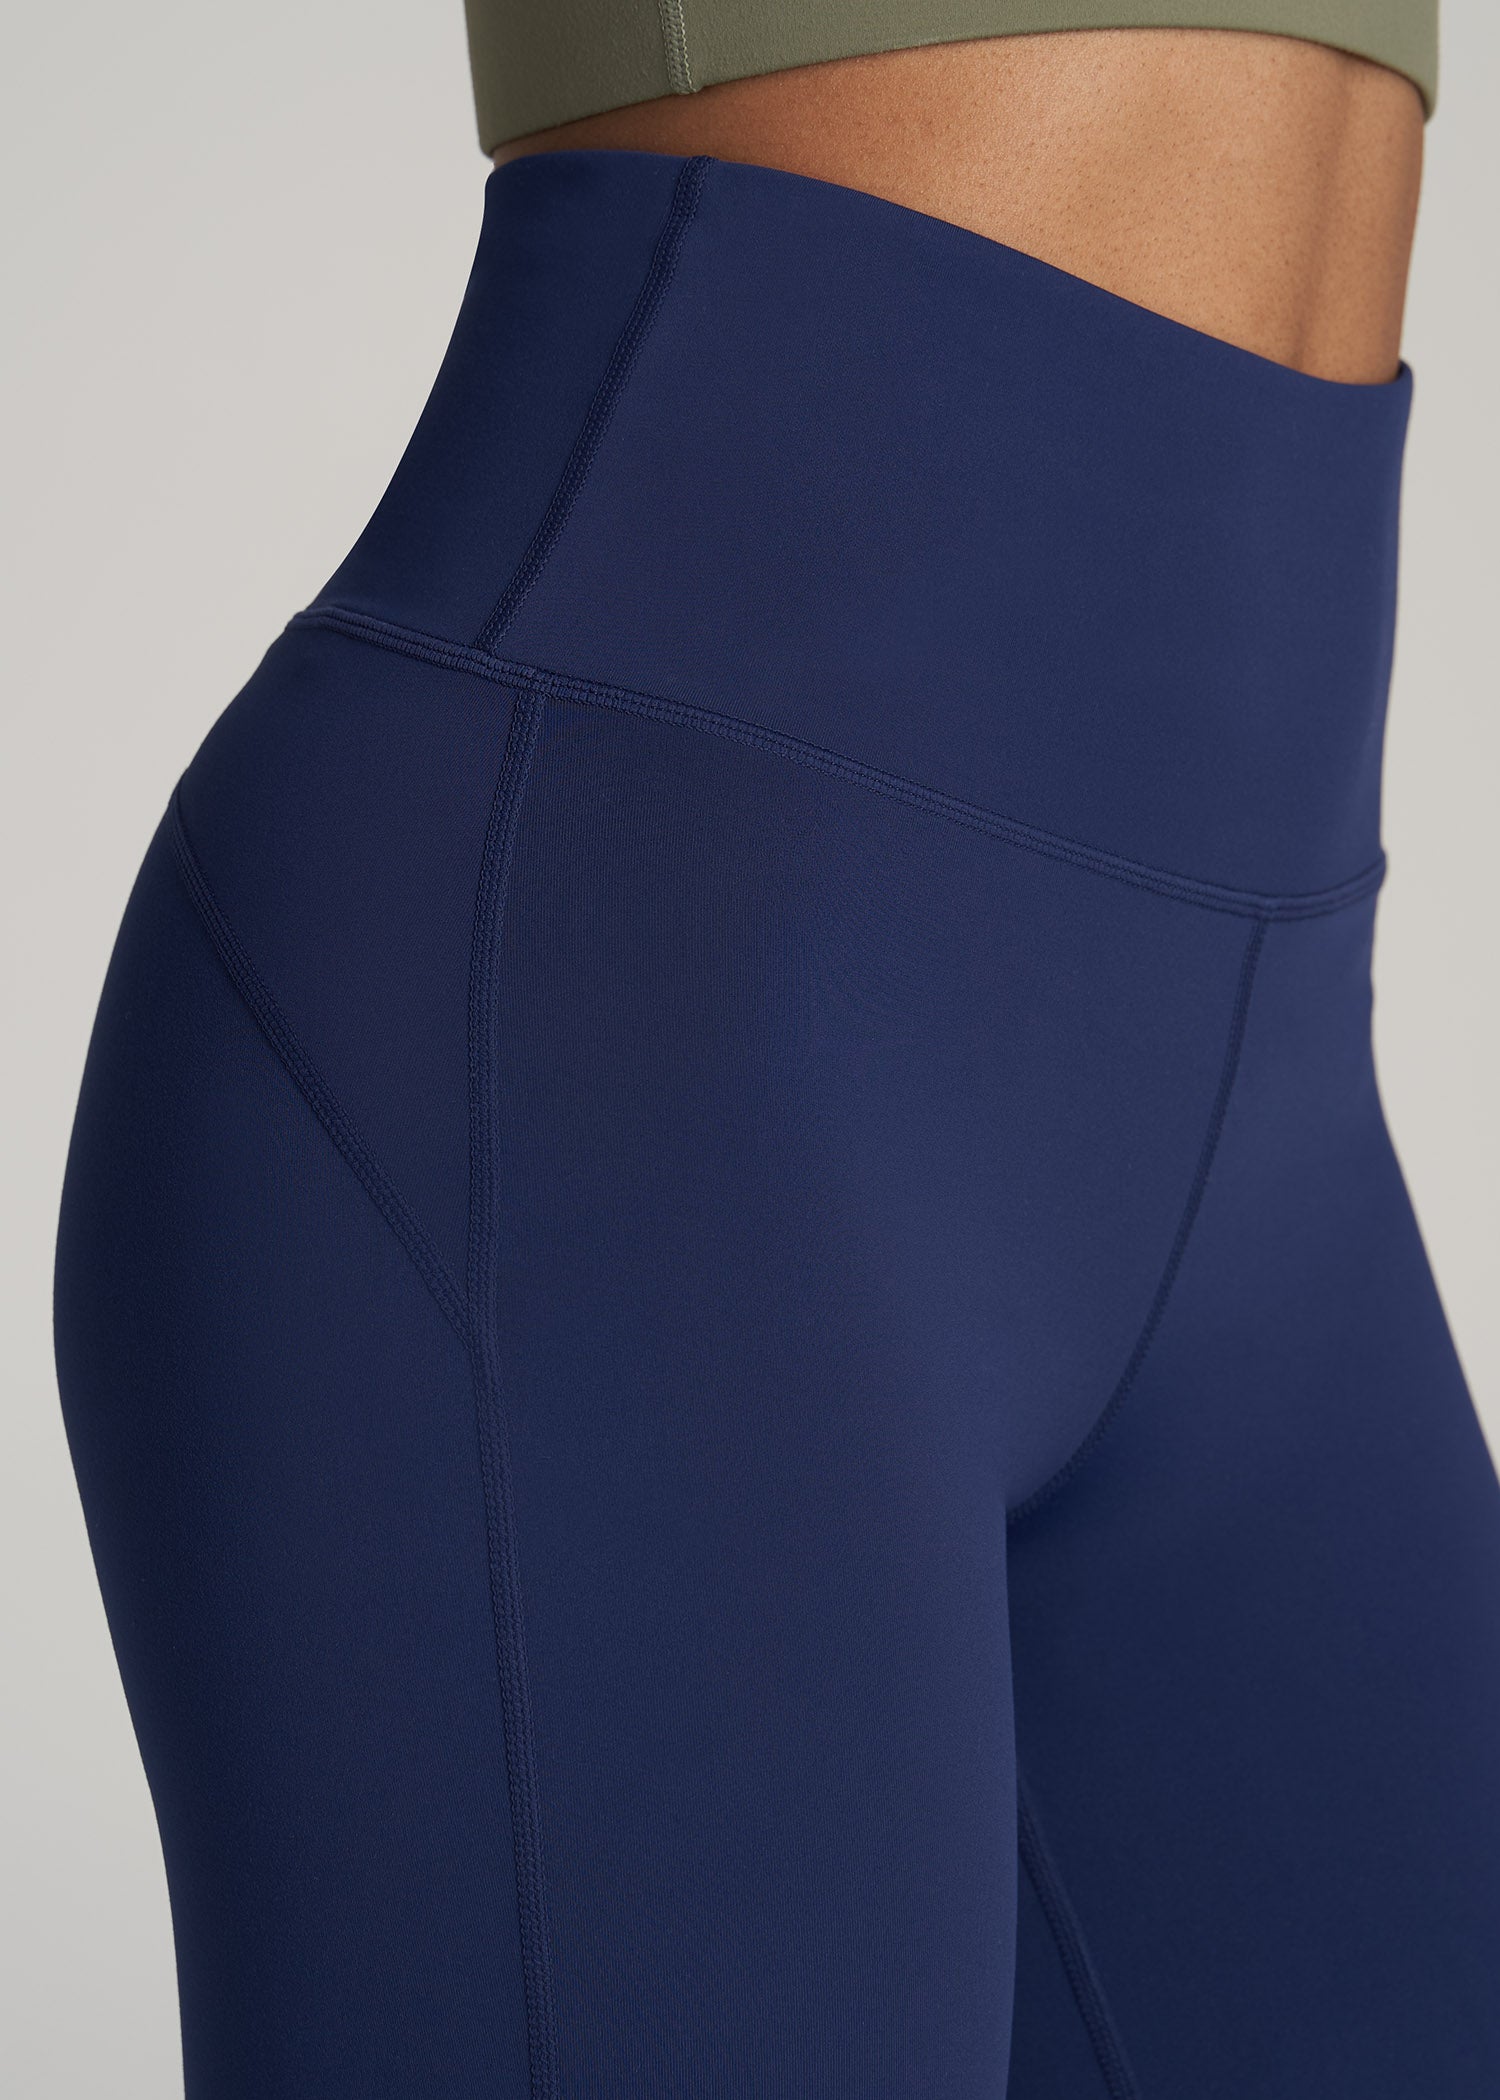 The Biggest Trends in yoga pants navy We've Seen This Year by c1ynvmy718 -  Issuu